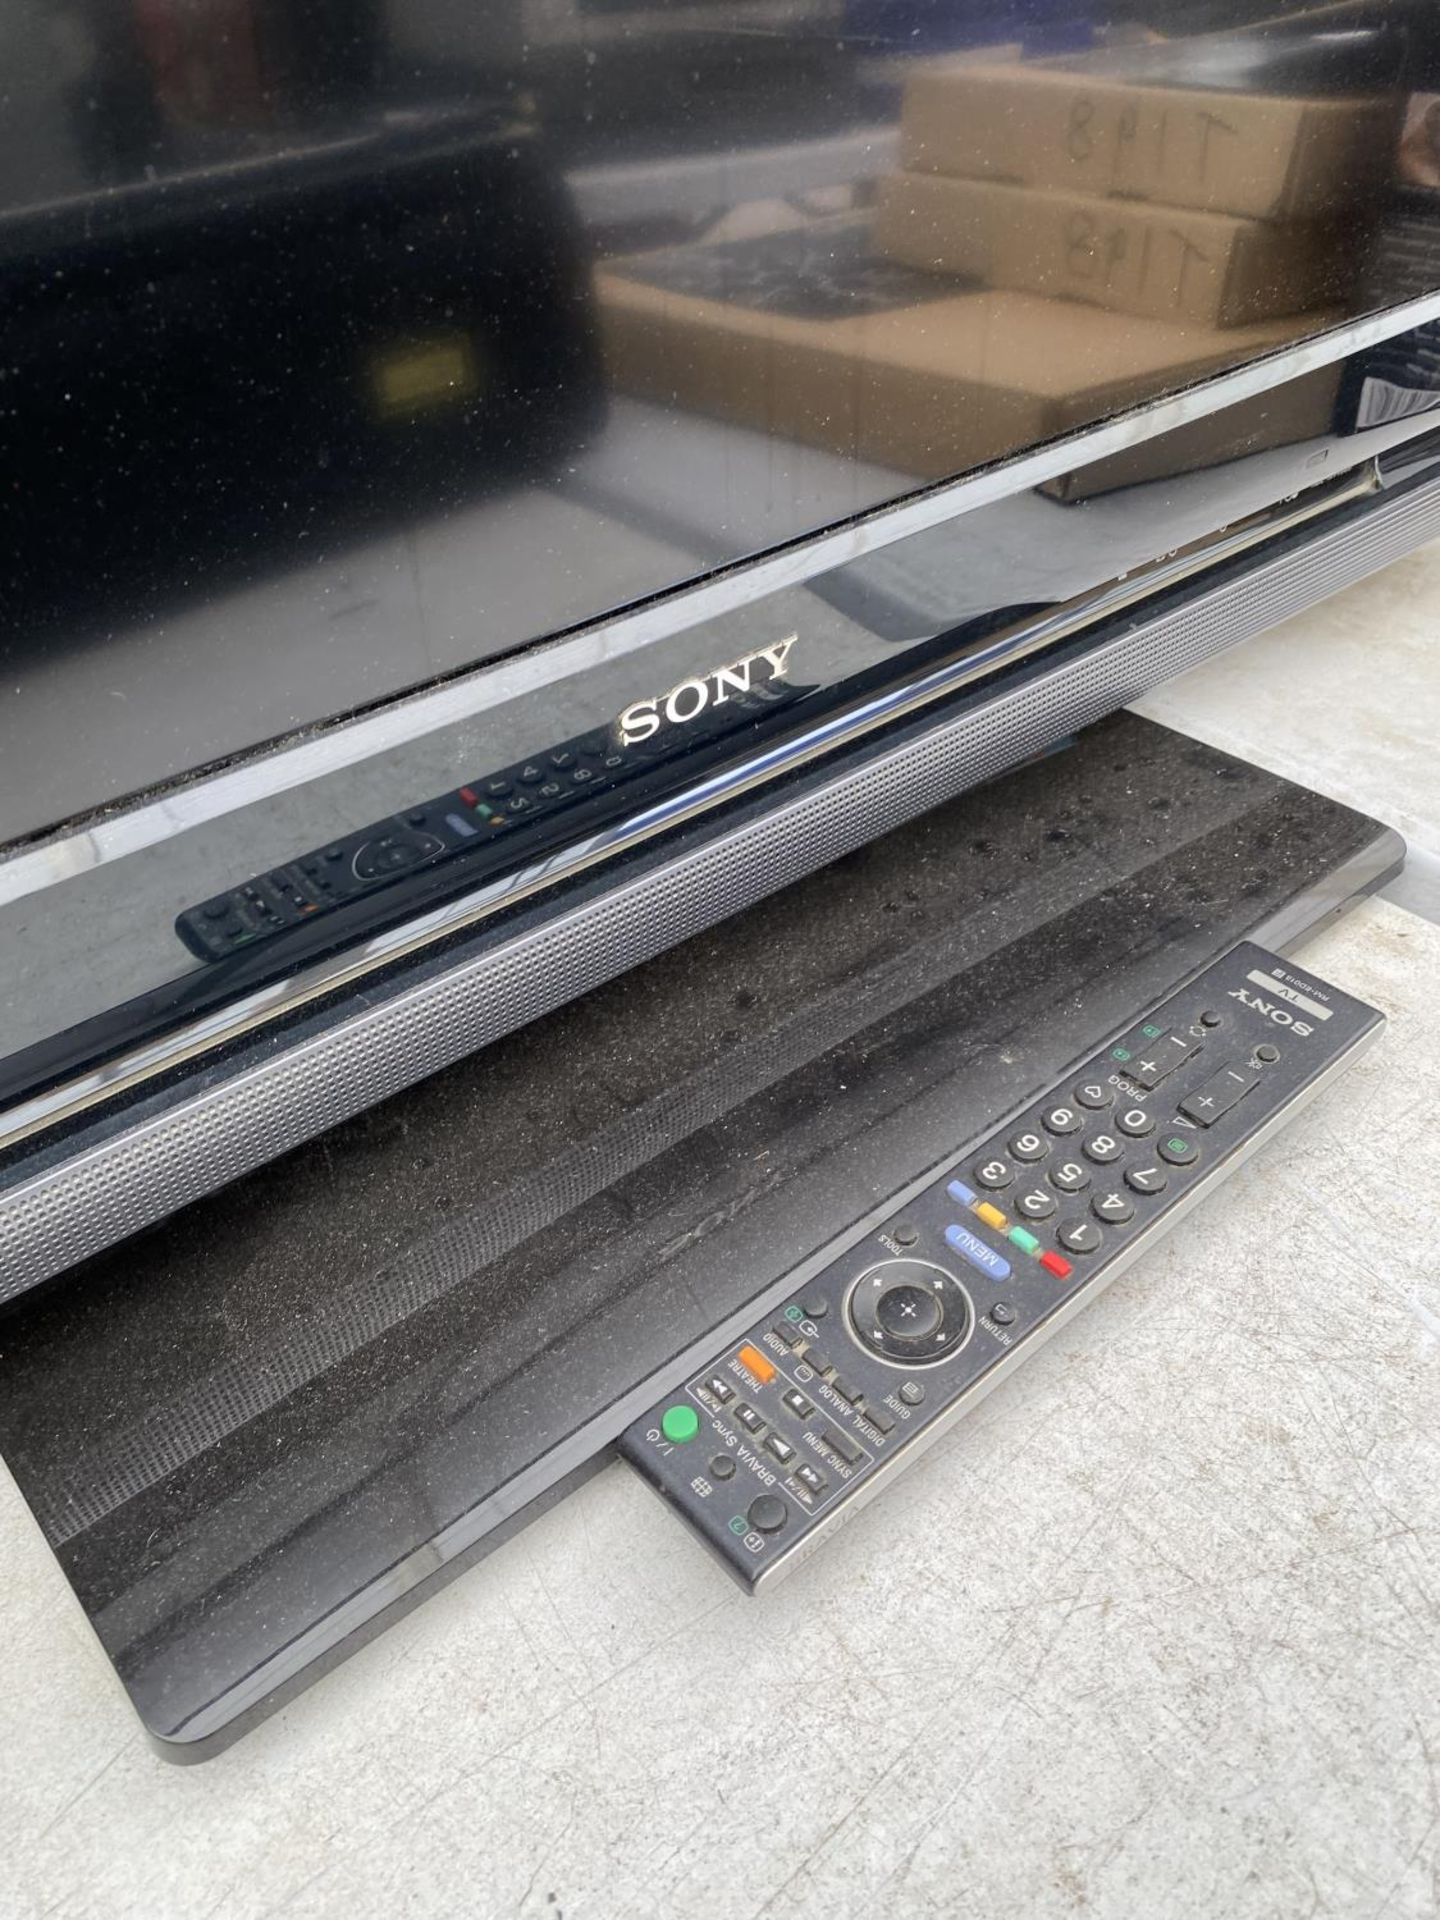 A SONY BRAVIA 40" TELEVISION WITH REMOTE CONTROL - Image 2 of 2